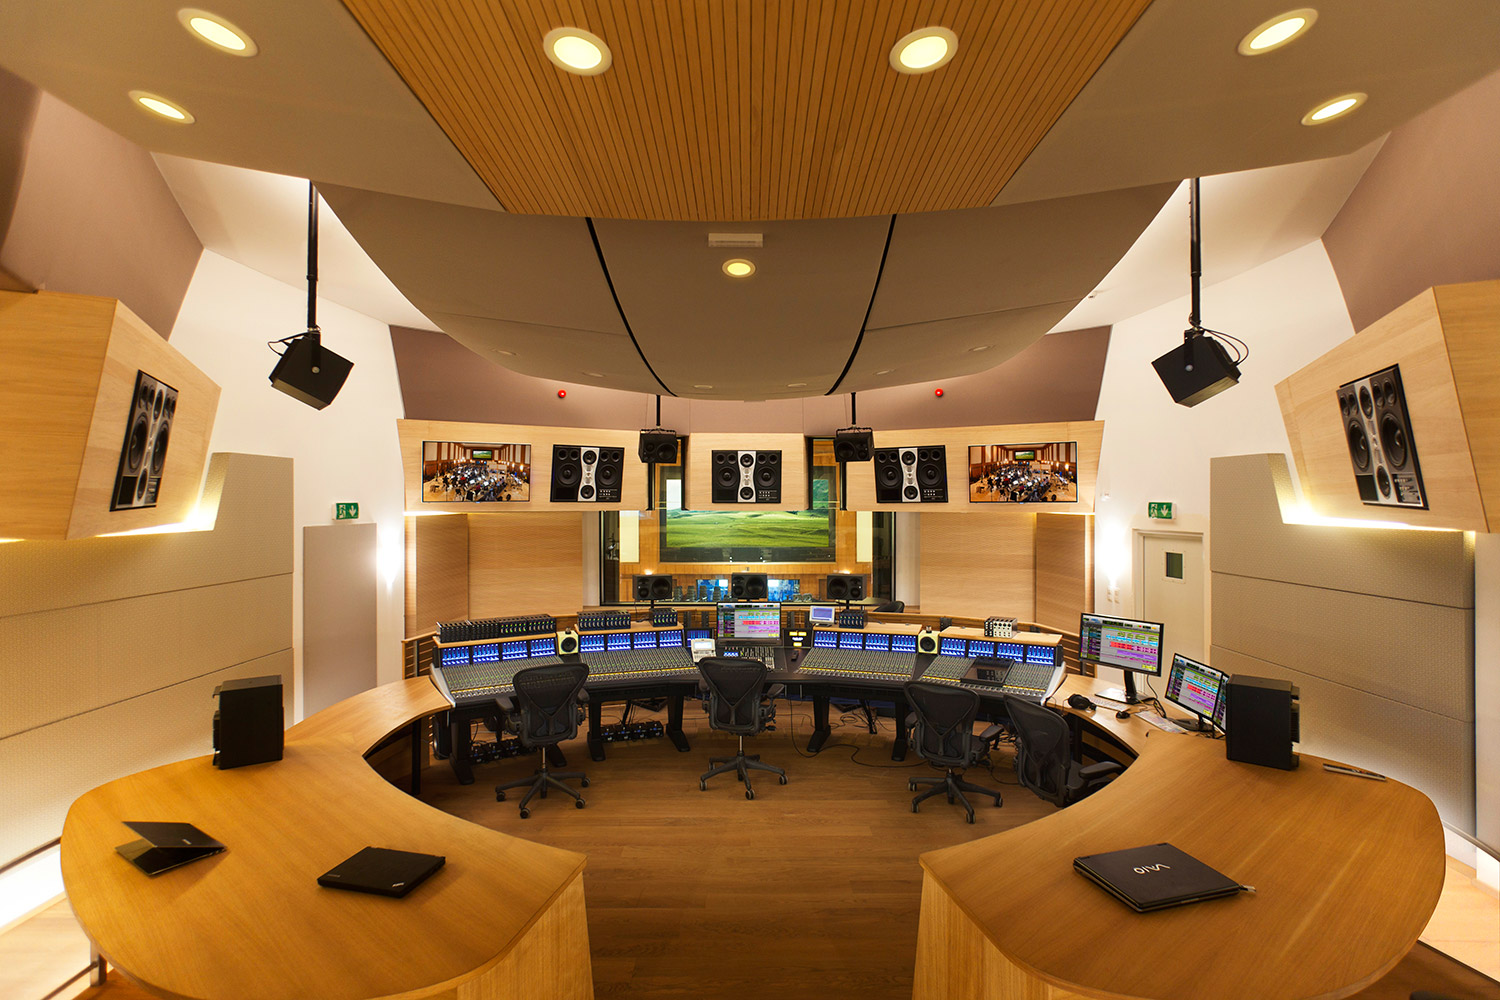 VSL Synchron Stage Control Room A - Main Photo color corrected. Renovation on historic recording studios for orchestras in Vienna, Austria